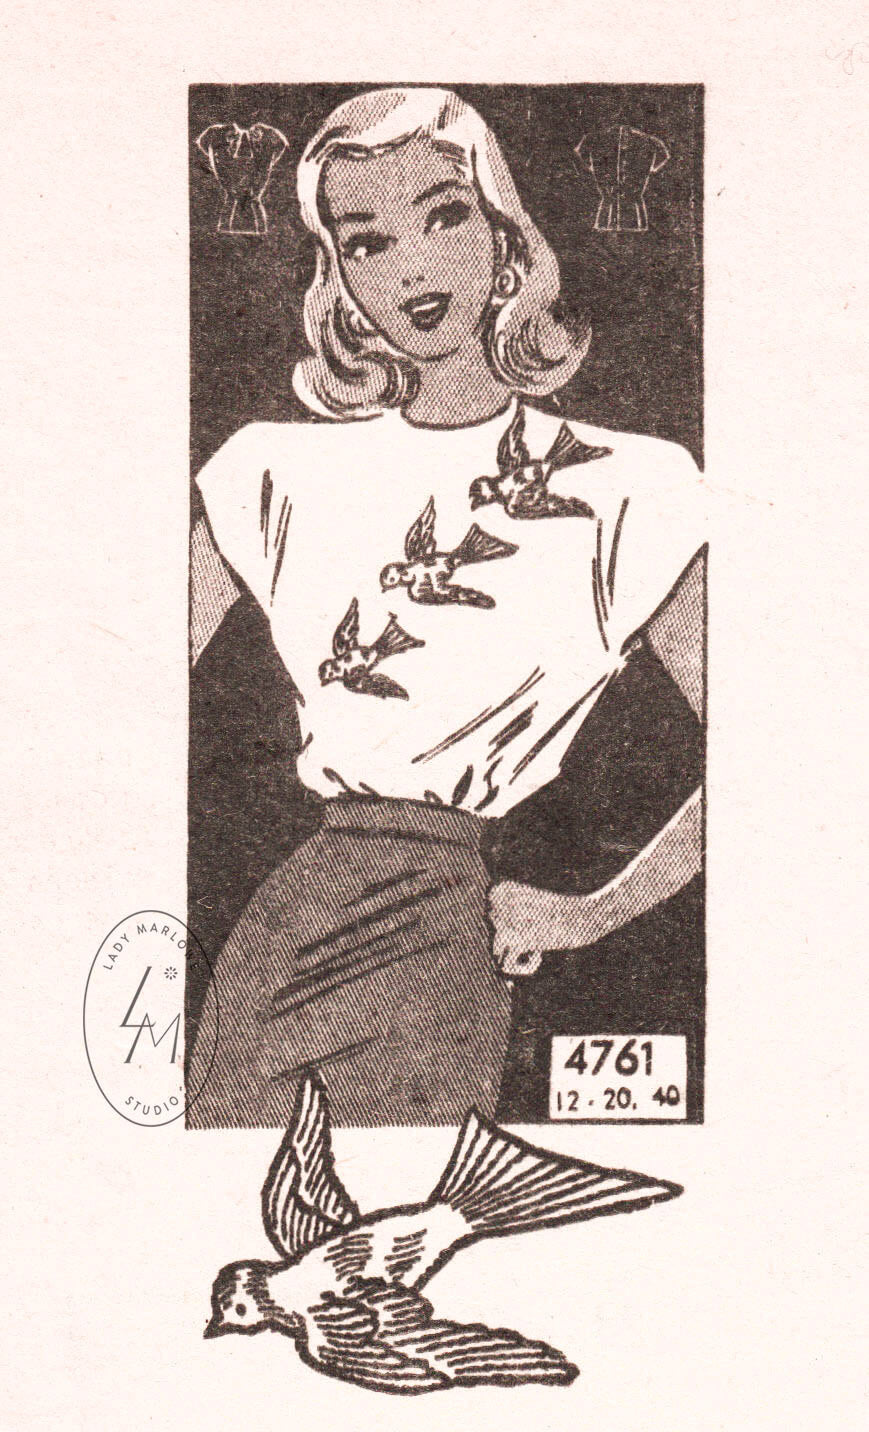 1940s blouse Anne Adams 4761 swallow bird embroidery vintage sewing pattern reproduction